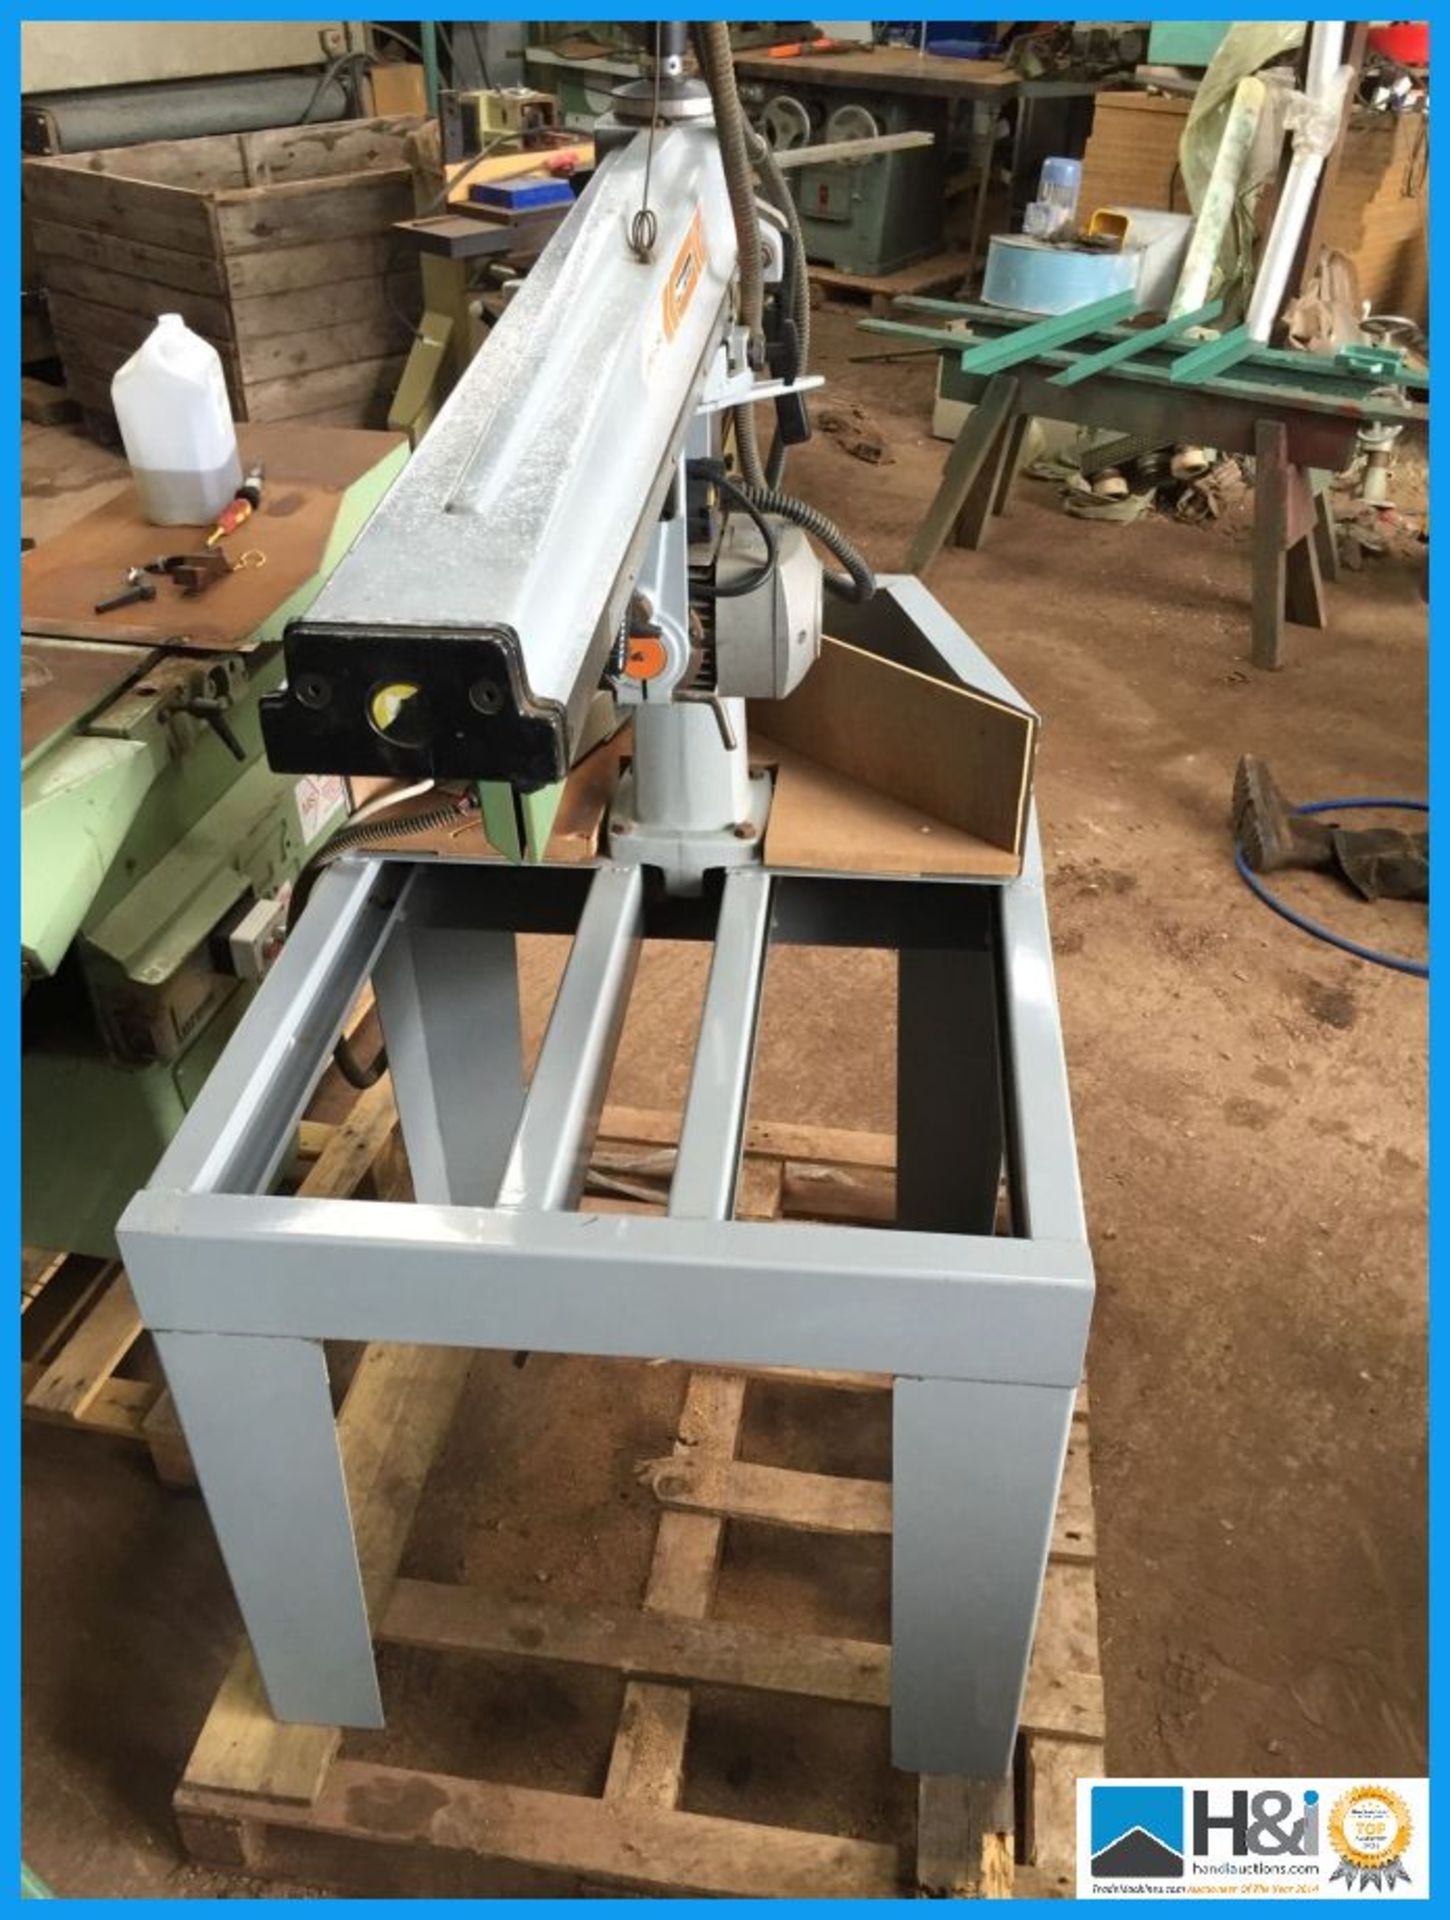 Maggie Junior 640 radial arm crosscut saw. It has a brake fitted and has been tested. Appraisal: